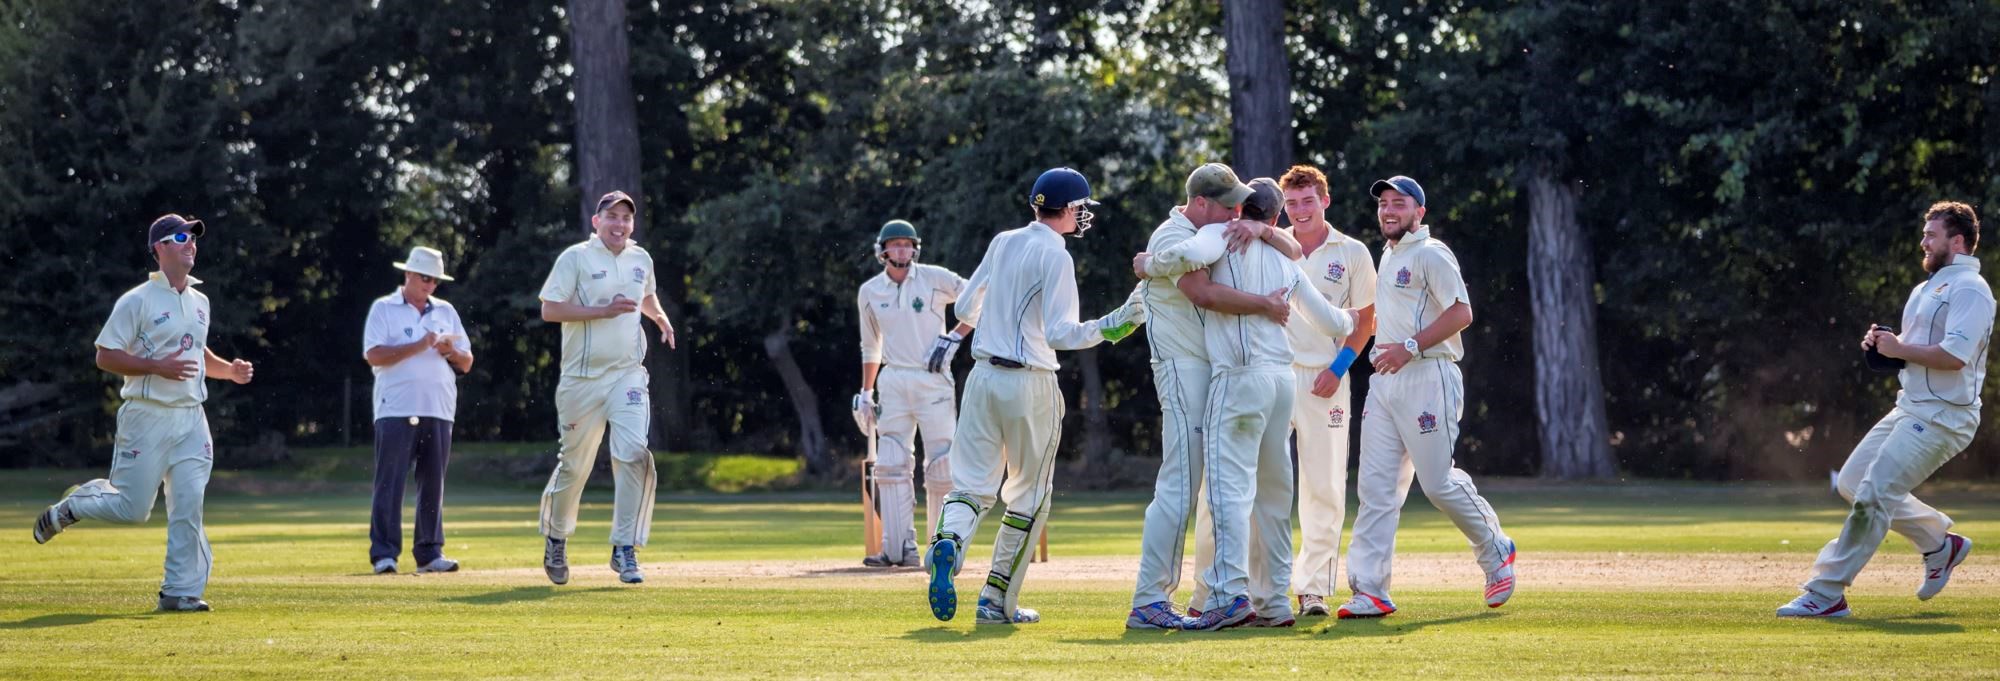 Recreational cricketers celebrating success